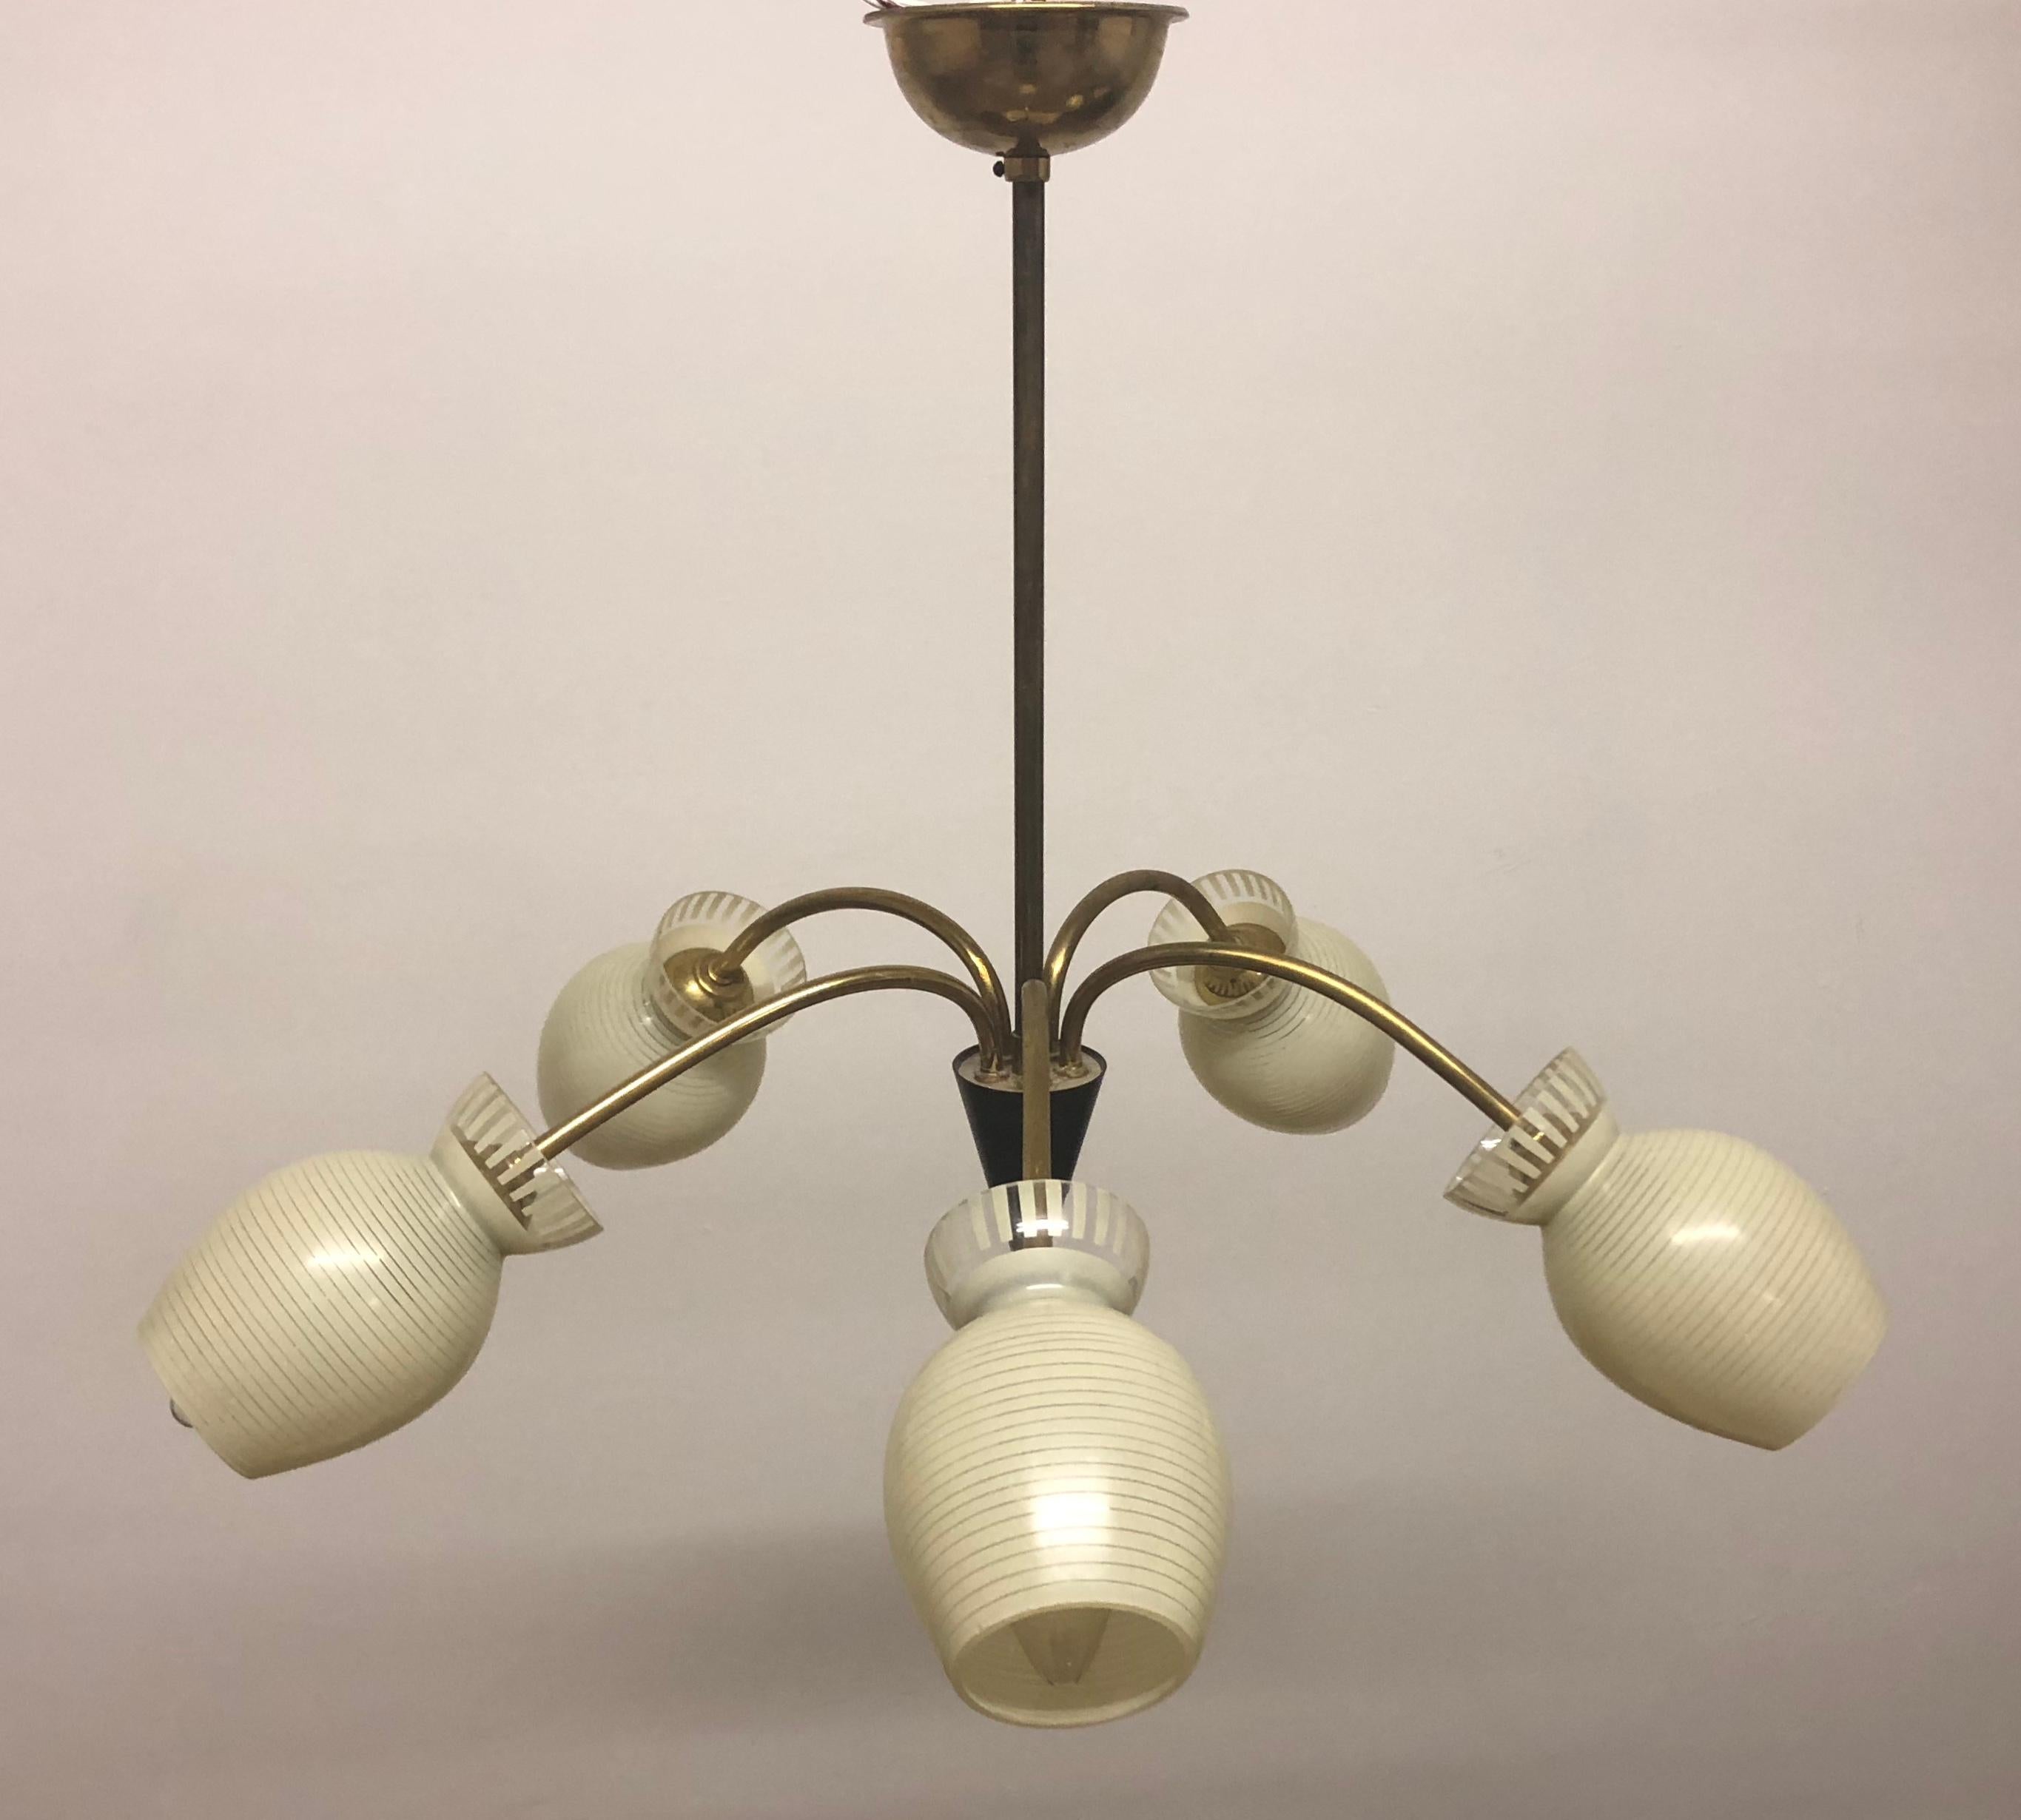 Fine, elegant Mid-Century Modern Sputnik chandelier, Germany, circa 1950s.
This chandelier is made of  brass frame and glass tubes.
Socket: Five Edison (e14) for standard screw bulbs.
Very good condition.